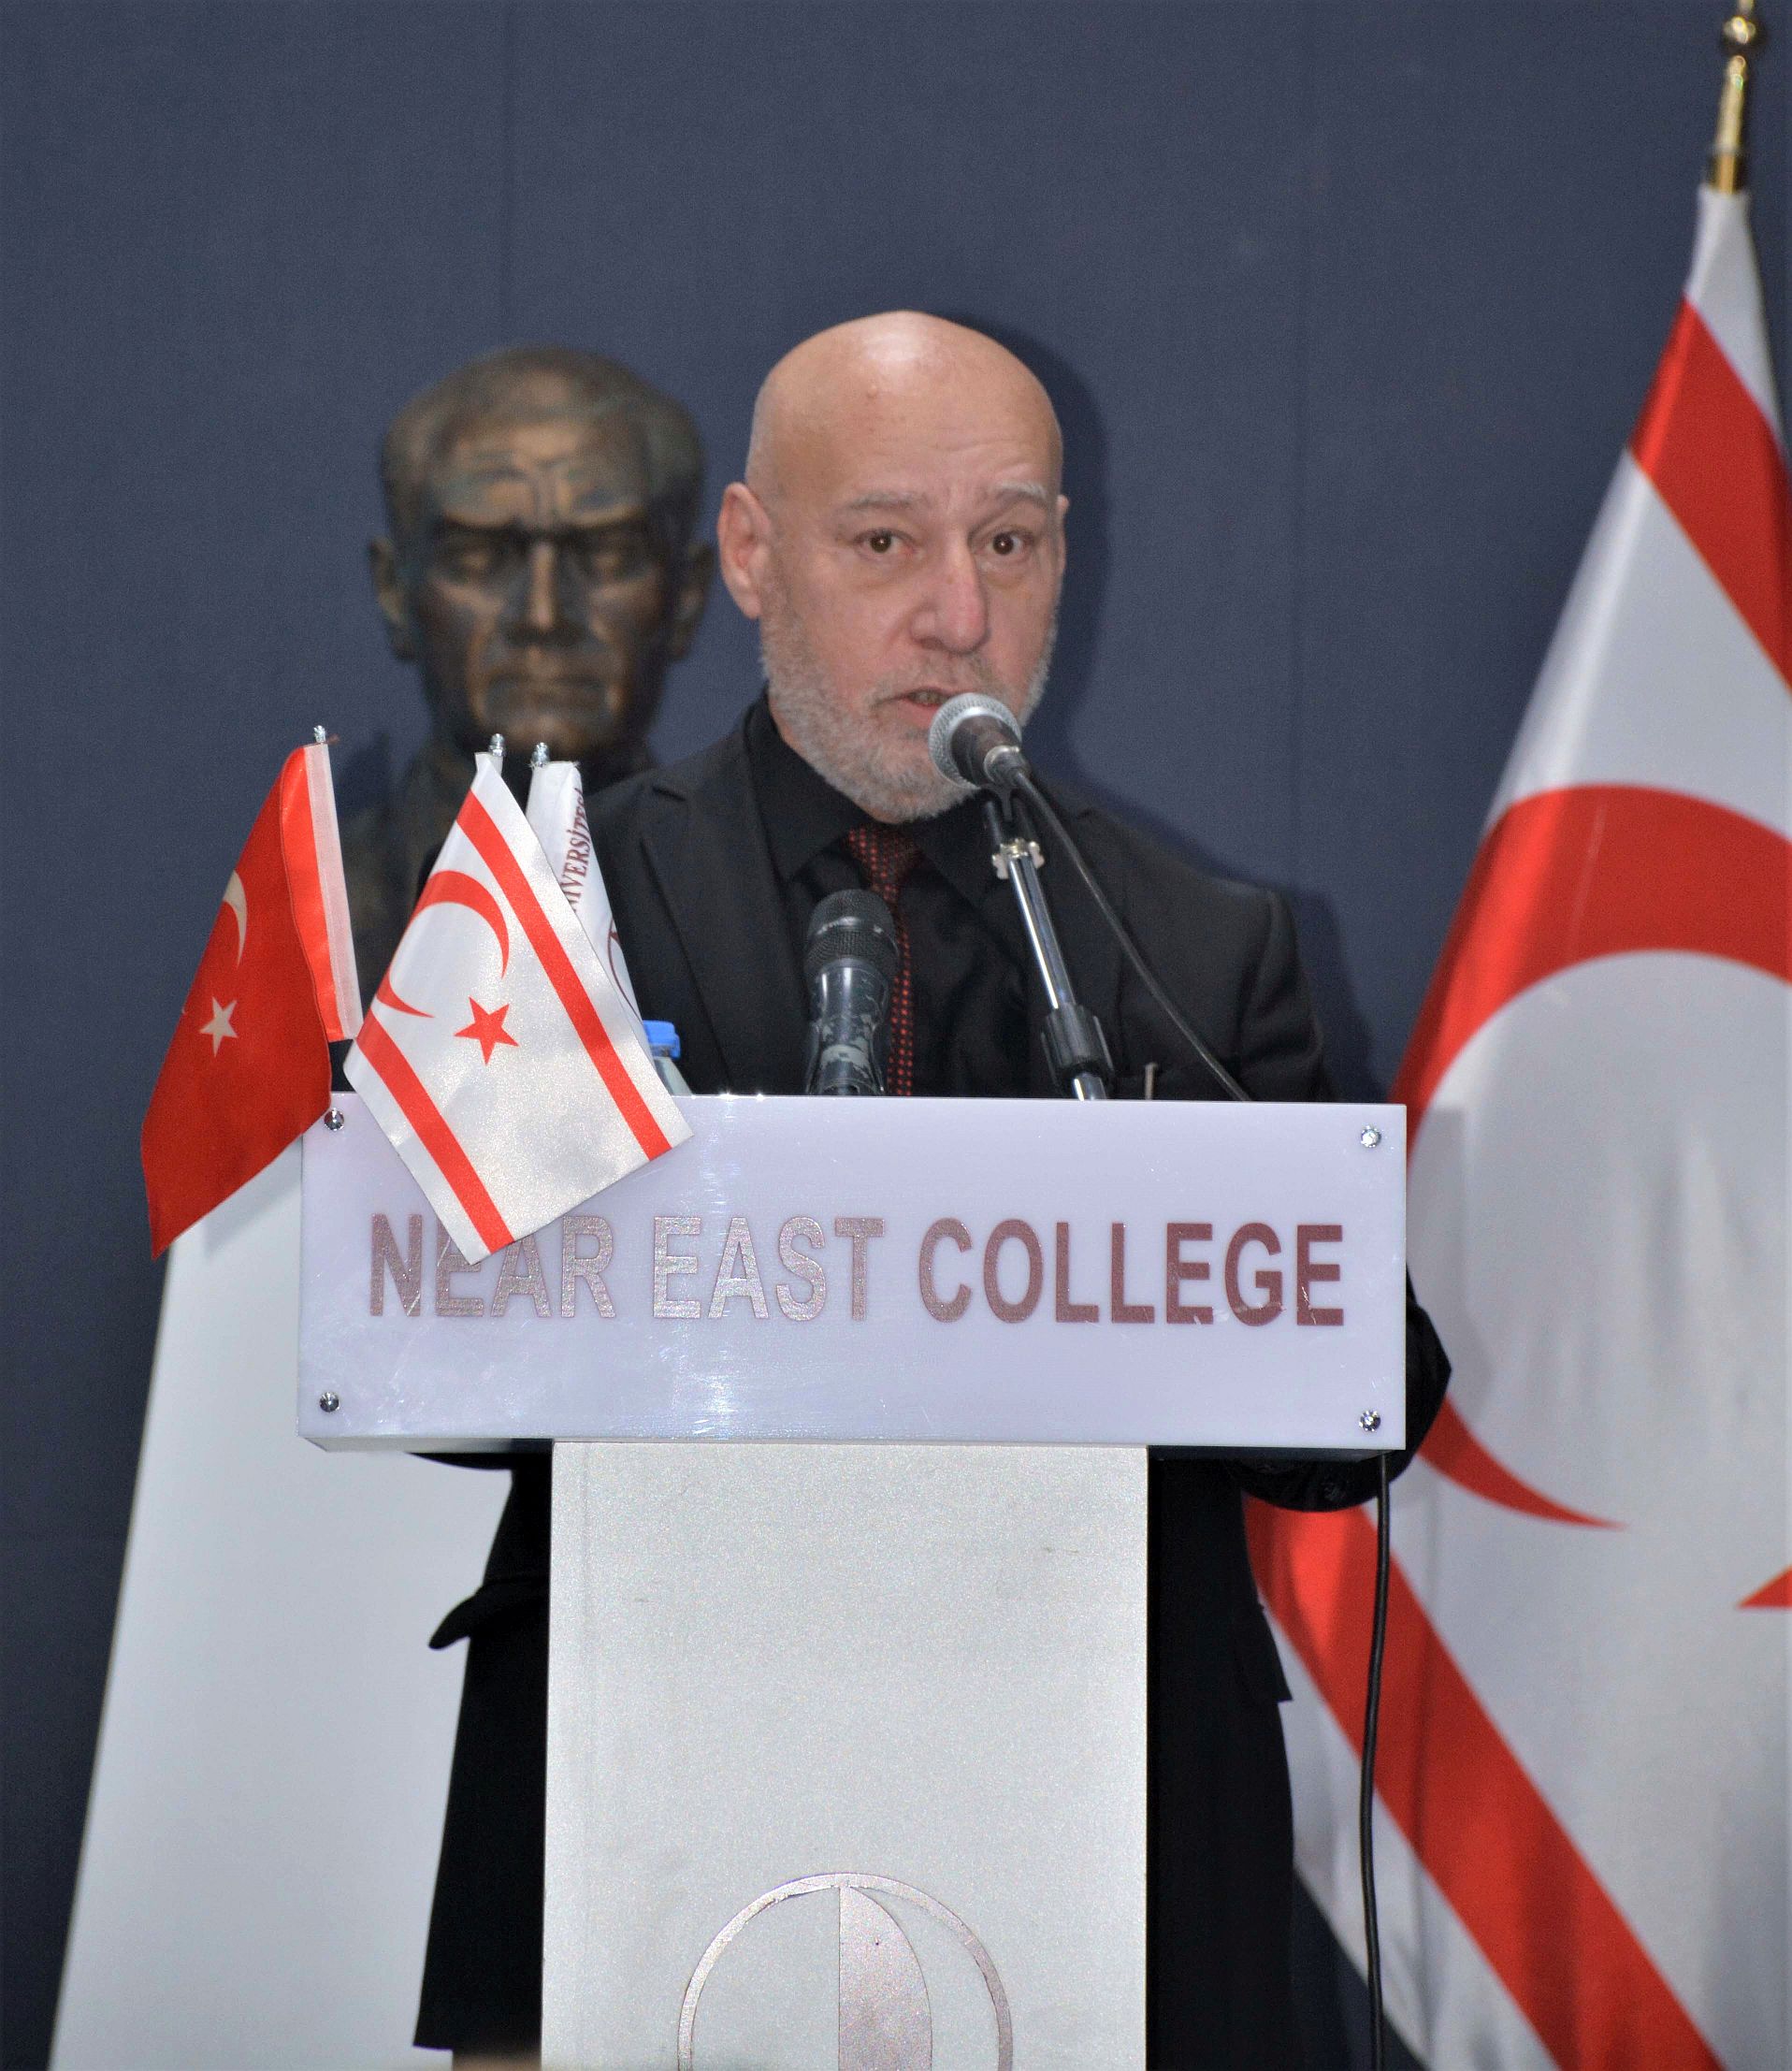 Near East Fine Arts Printmaking Exhibition was opened by the Minister of Public Works and Transport, Resmiye Eroğlu Canaltay, at the Near East Yeniboğaziçi Campus Grand Library Fine Arts Gallery